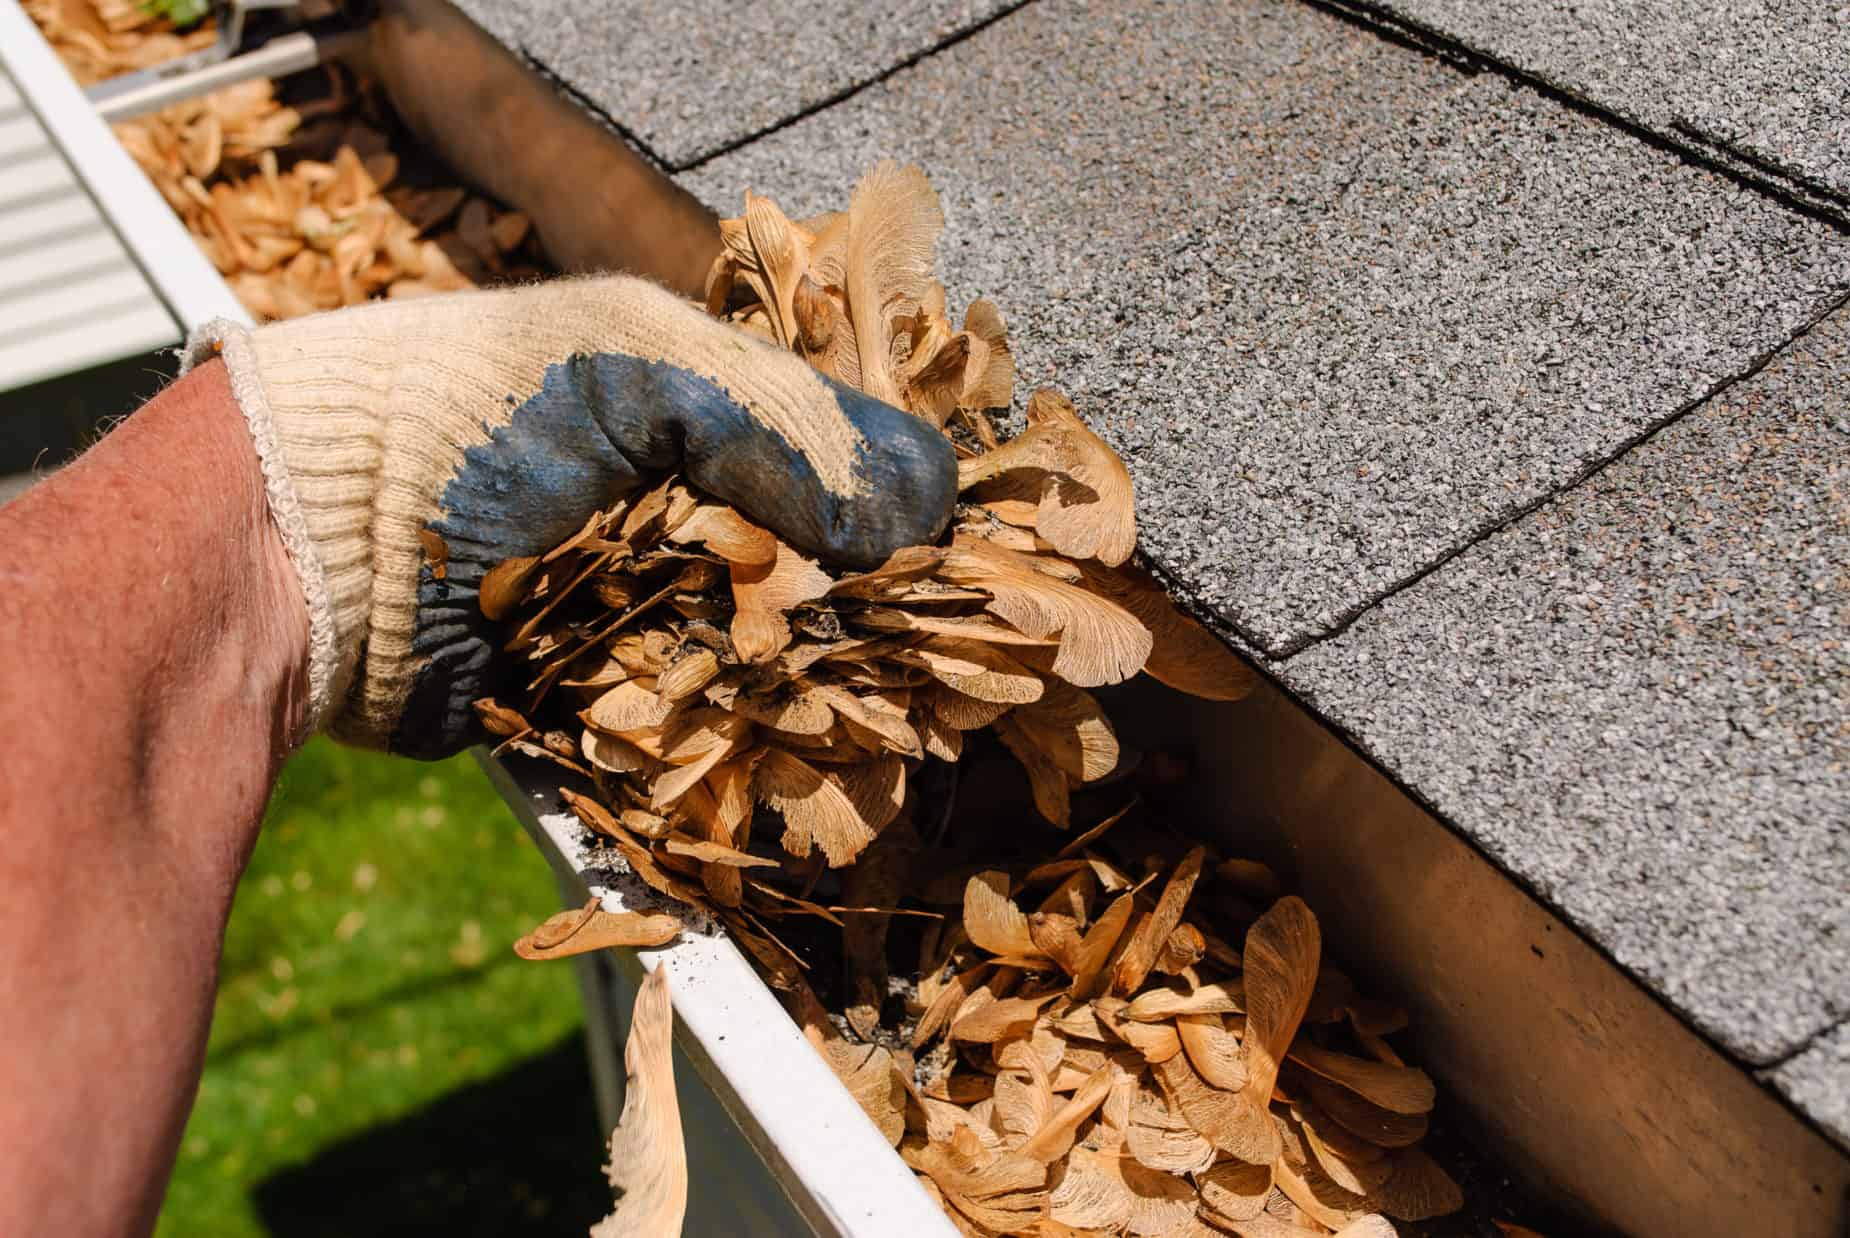 Gutter cleaning service Toronto